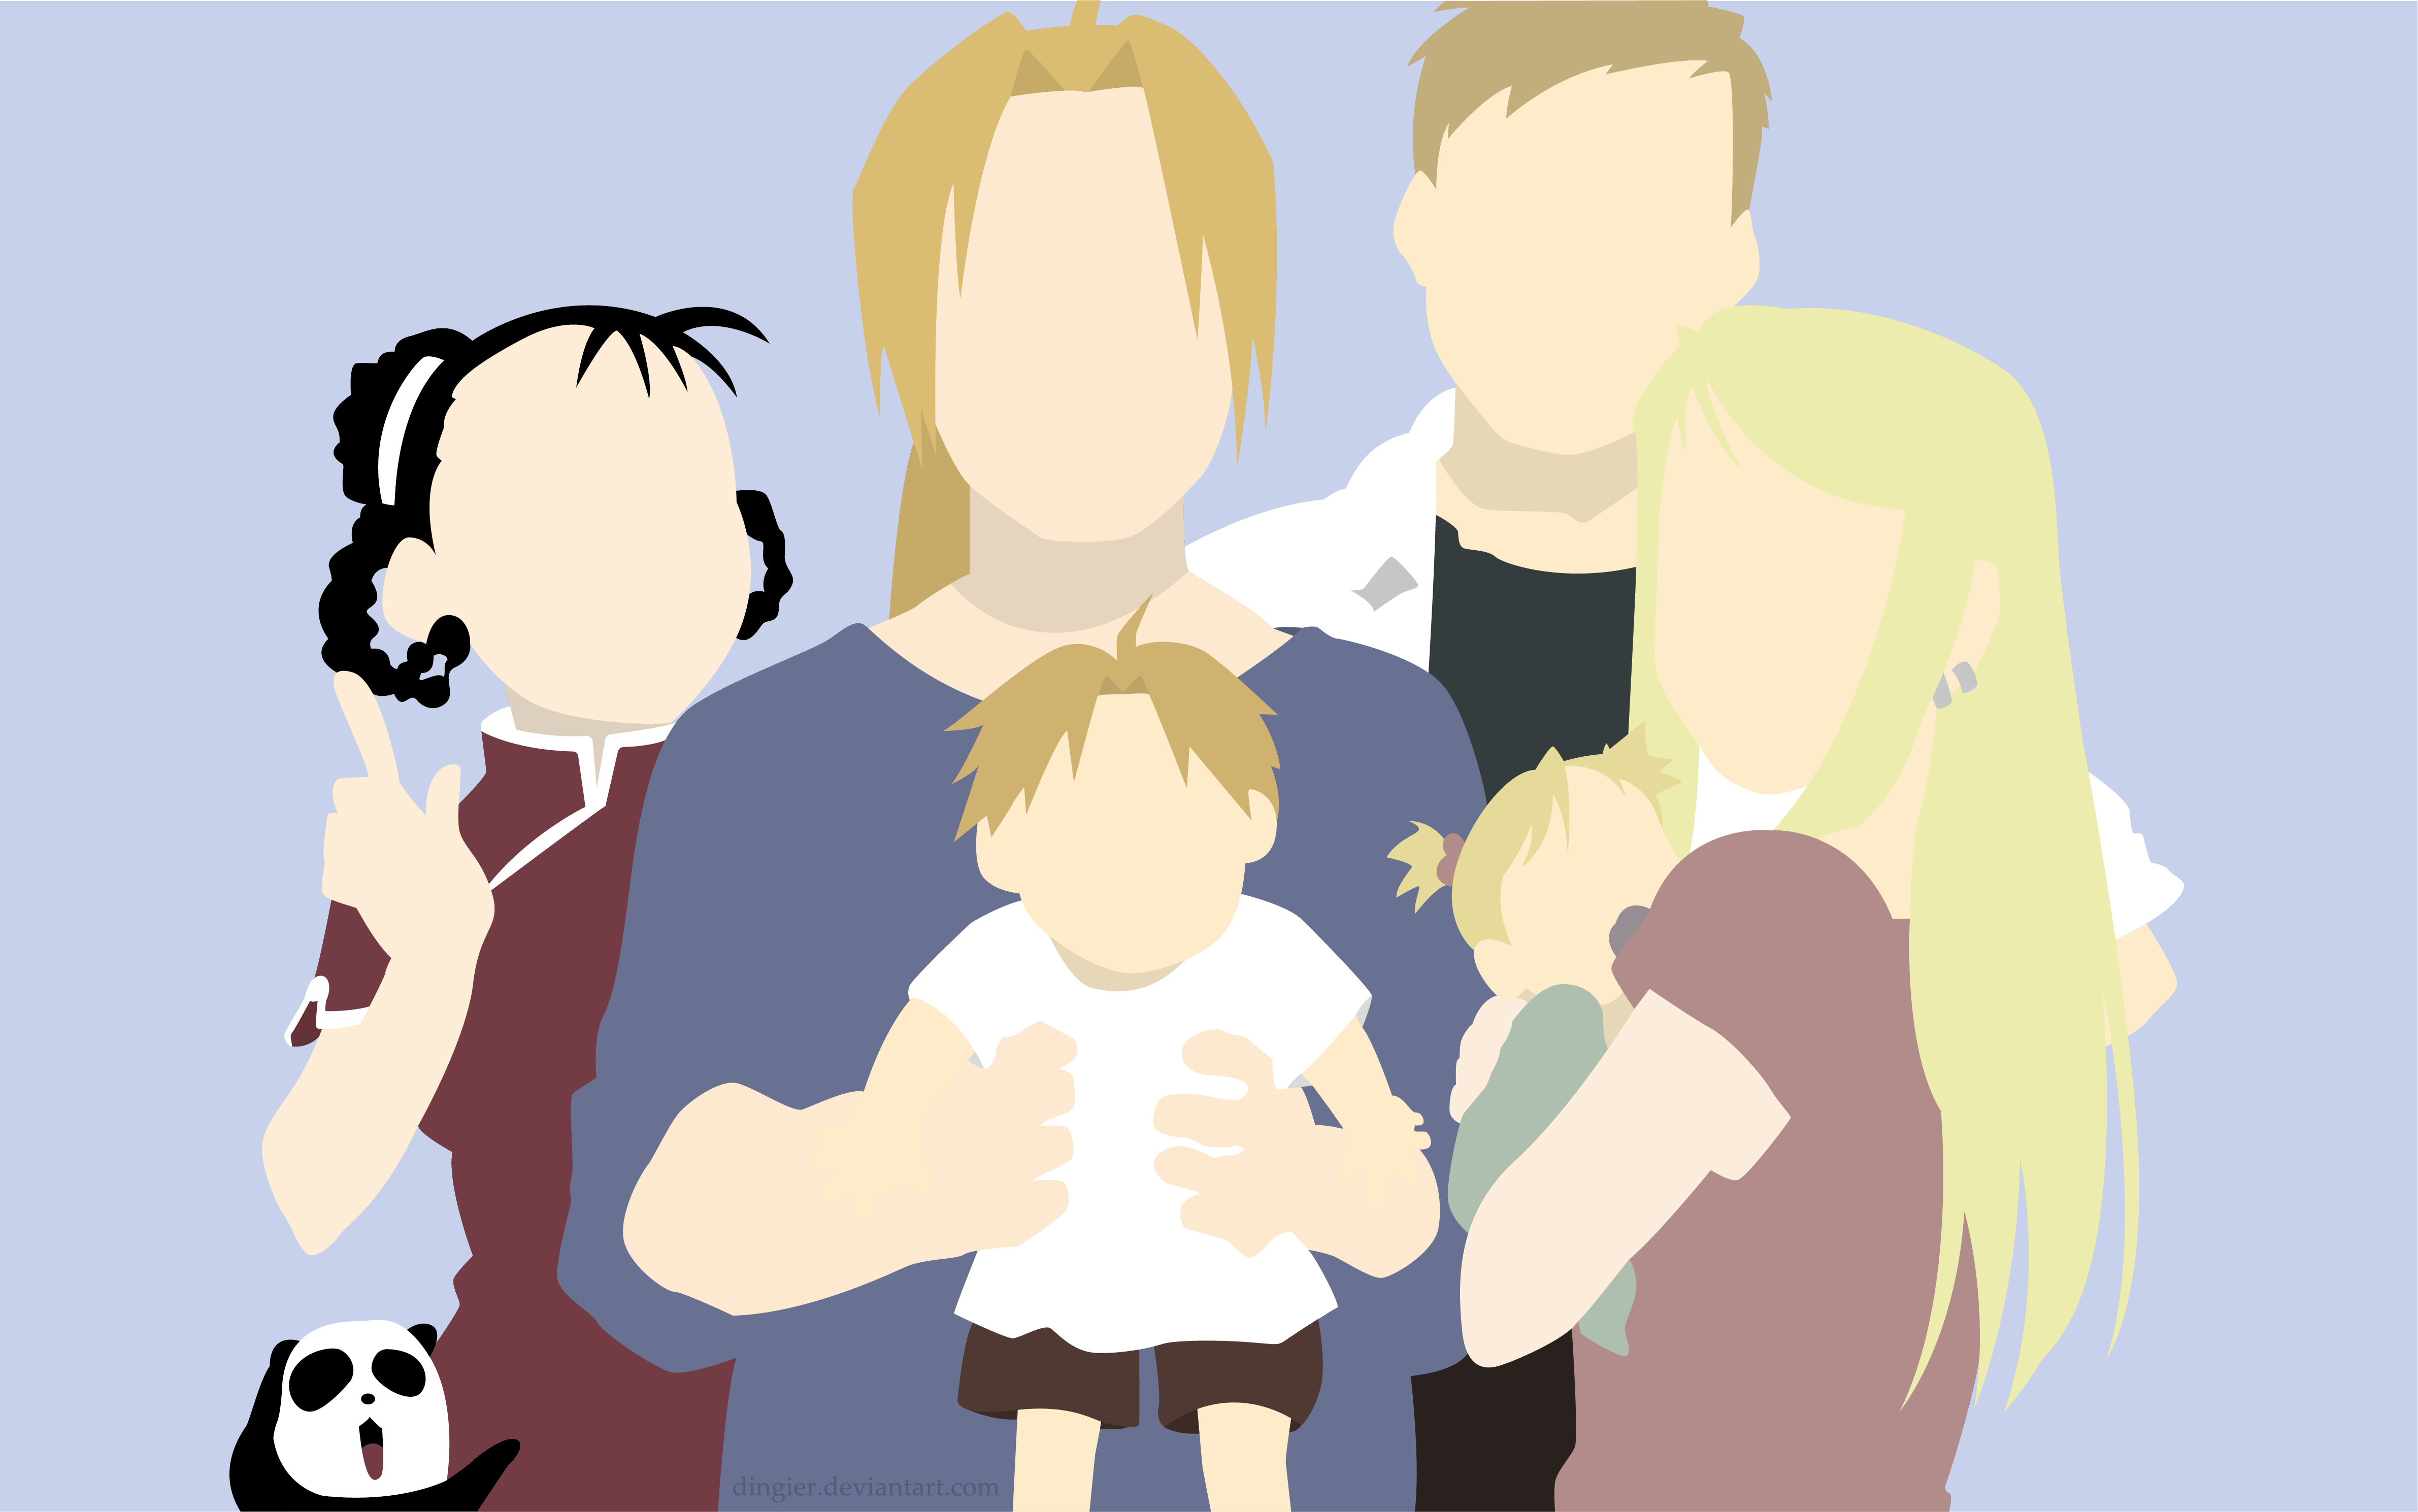 Edward Elric Alphonse Elric Winry Rockbell May Chang Xiao Mei Fullmetal Alchemist Shao May 4763x2979